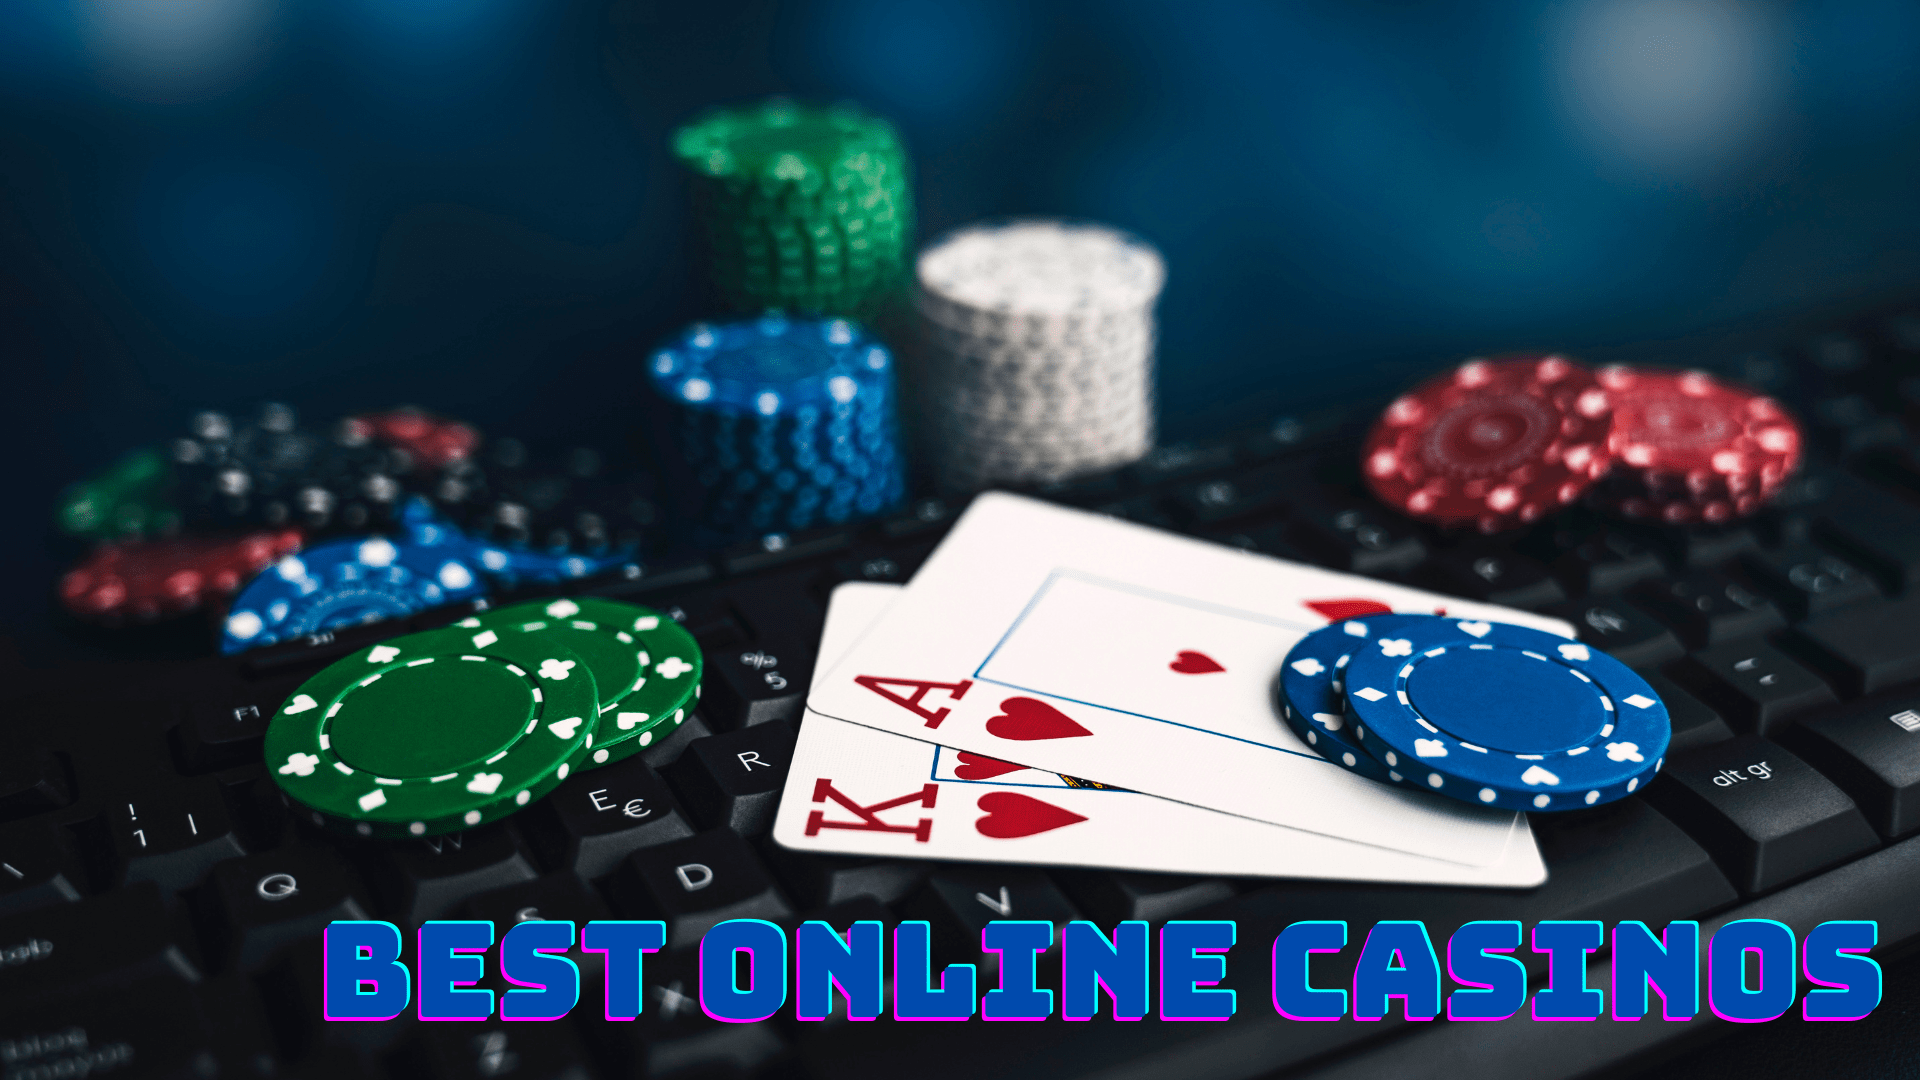 The Connection Between online casinos and Risk-Taking